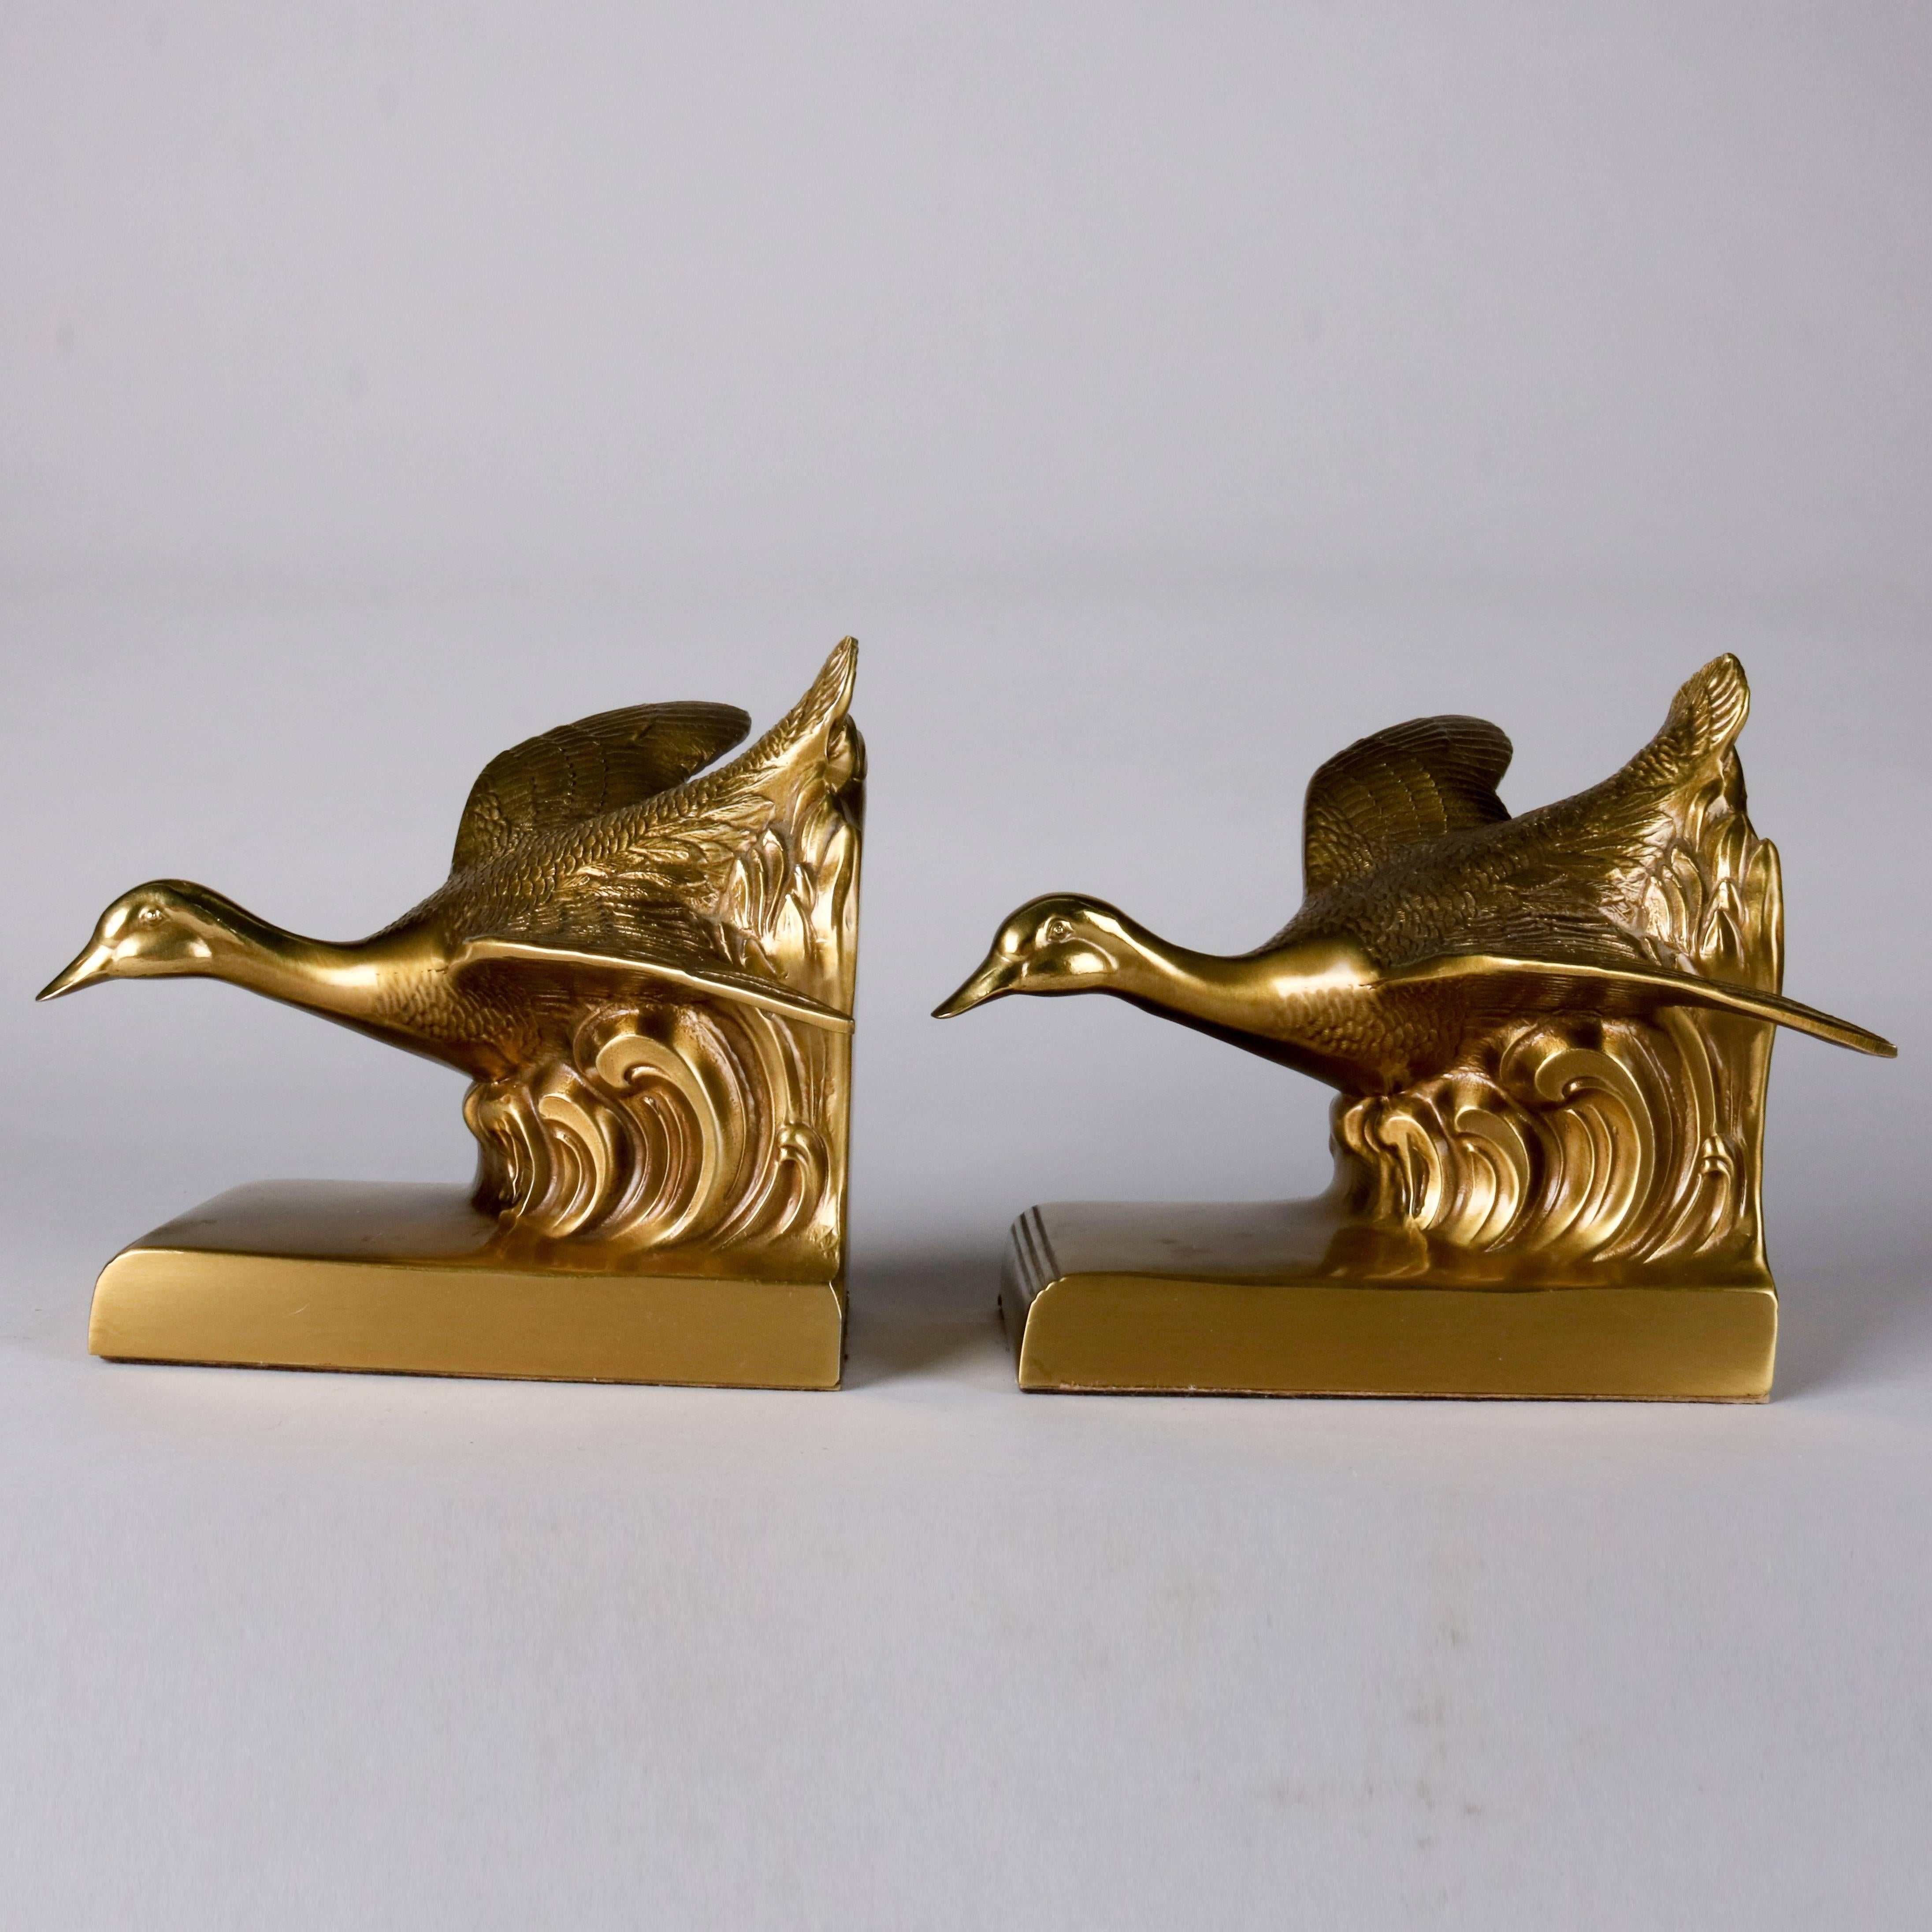 Pair of Brass-Plated Flying Geese Bookends by Jennings Brothers 1